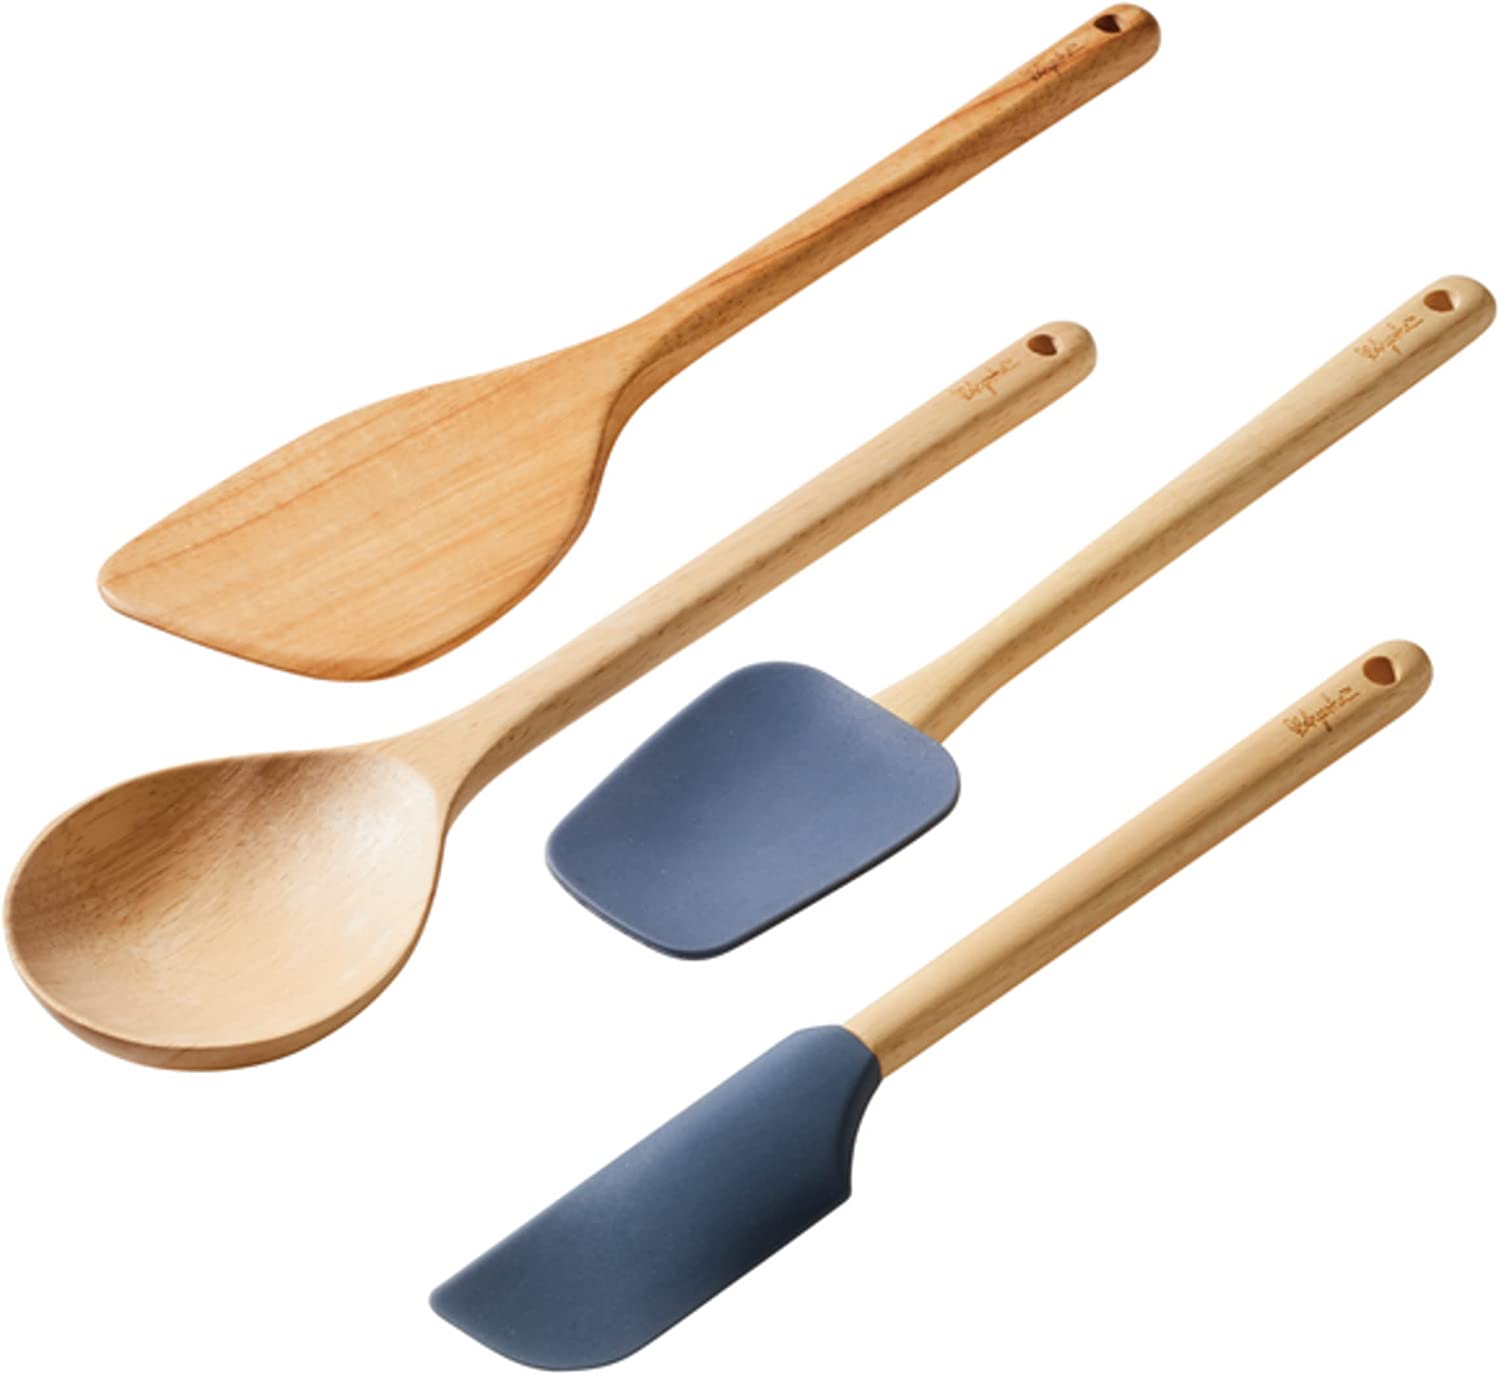 Ayesha Curry Tools and Gadgets Cooking/Kitchen Utensil Set-Includes Solid Spoon, Saute Paddle, Spoonula, Jar Spatula, 4 Piece, Anchor